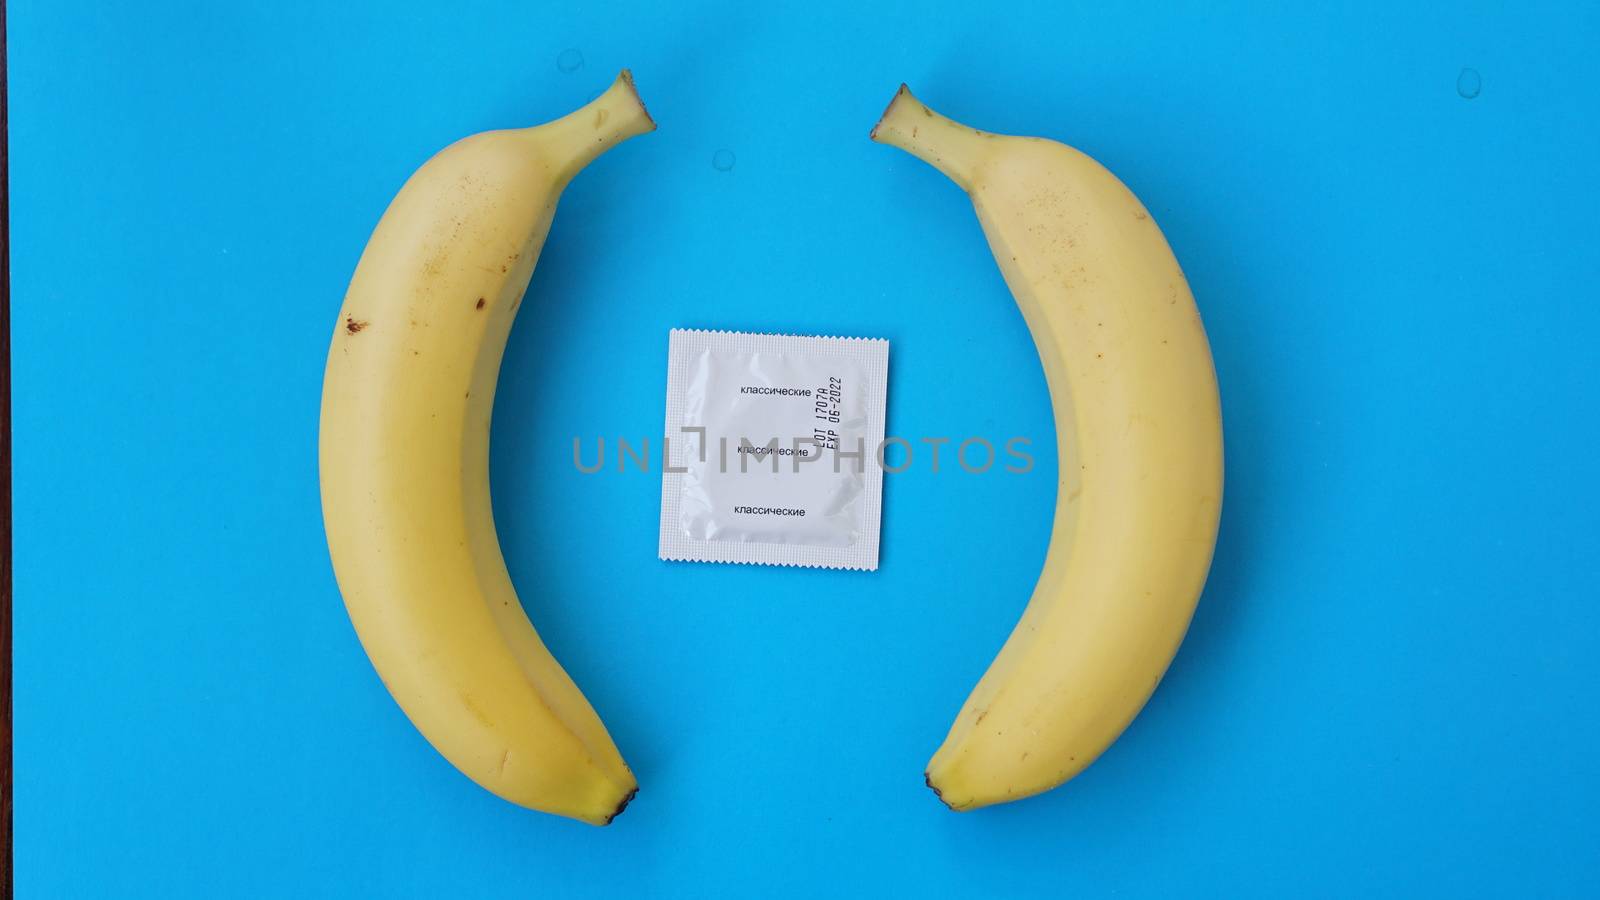 Condoms and two bananas together, concept of contraceptives and the prevention by natali_brill